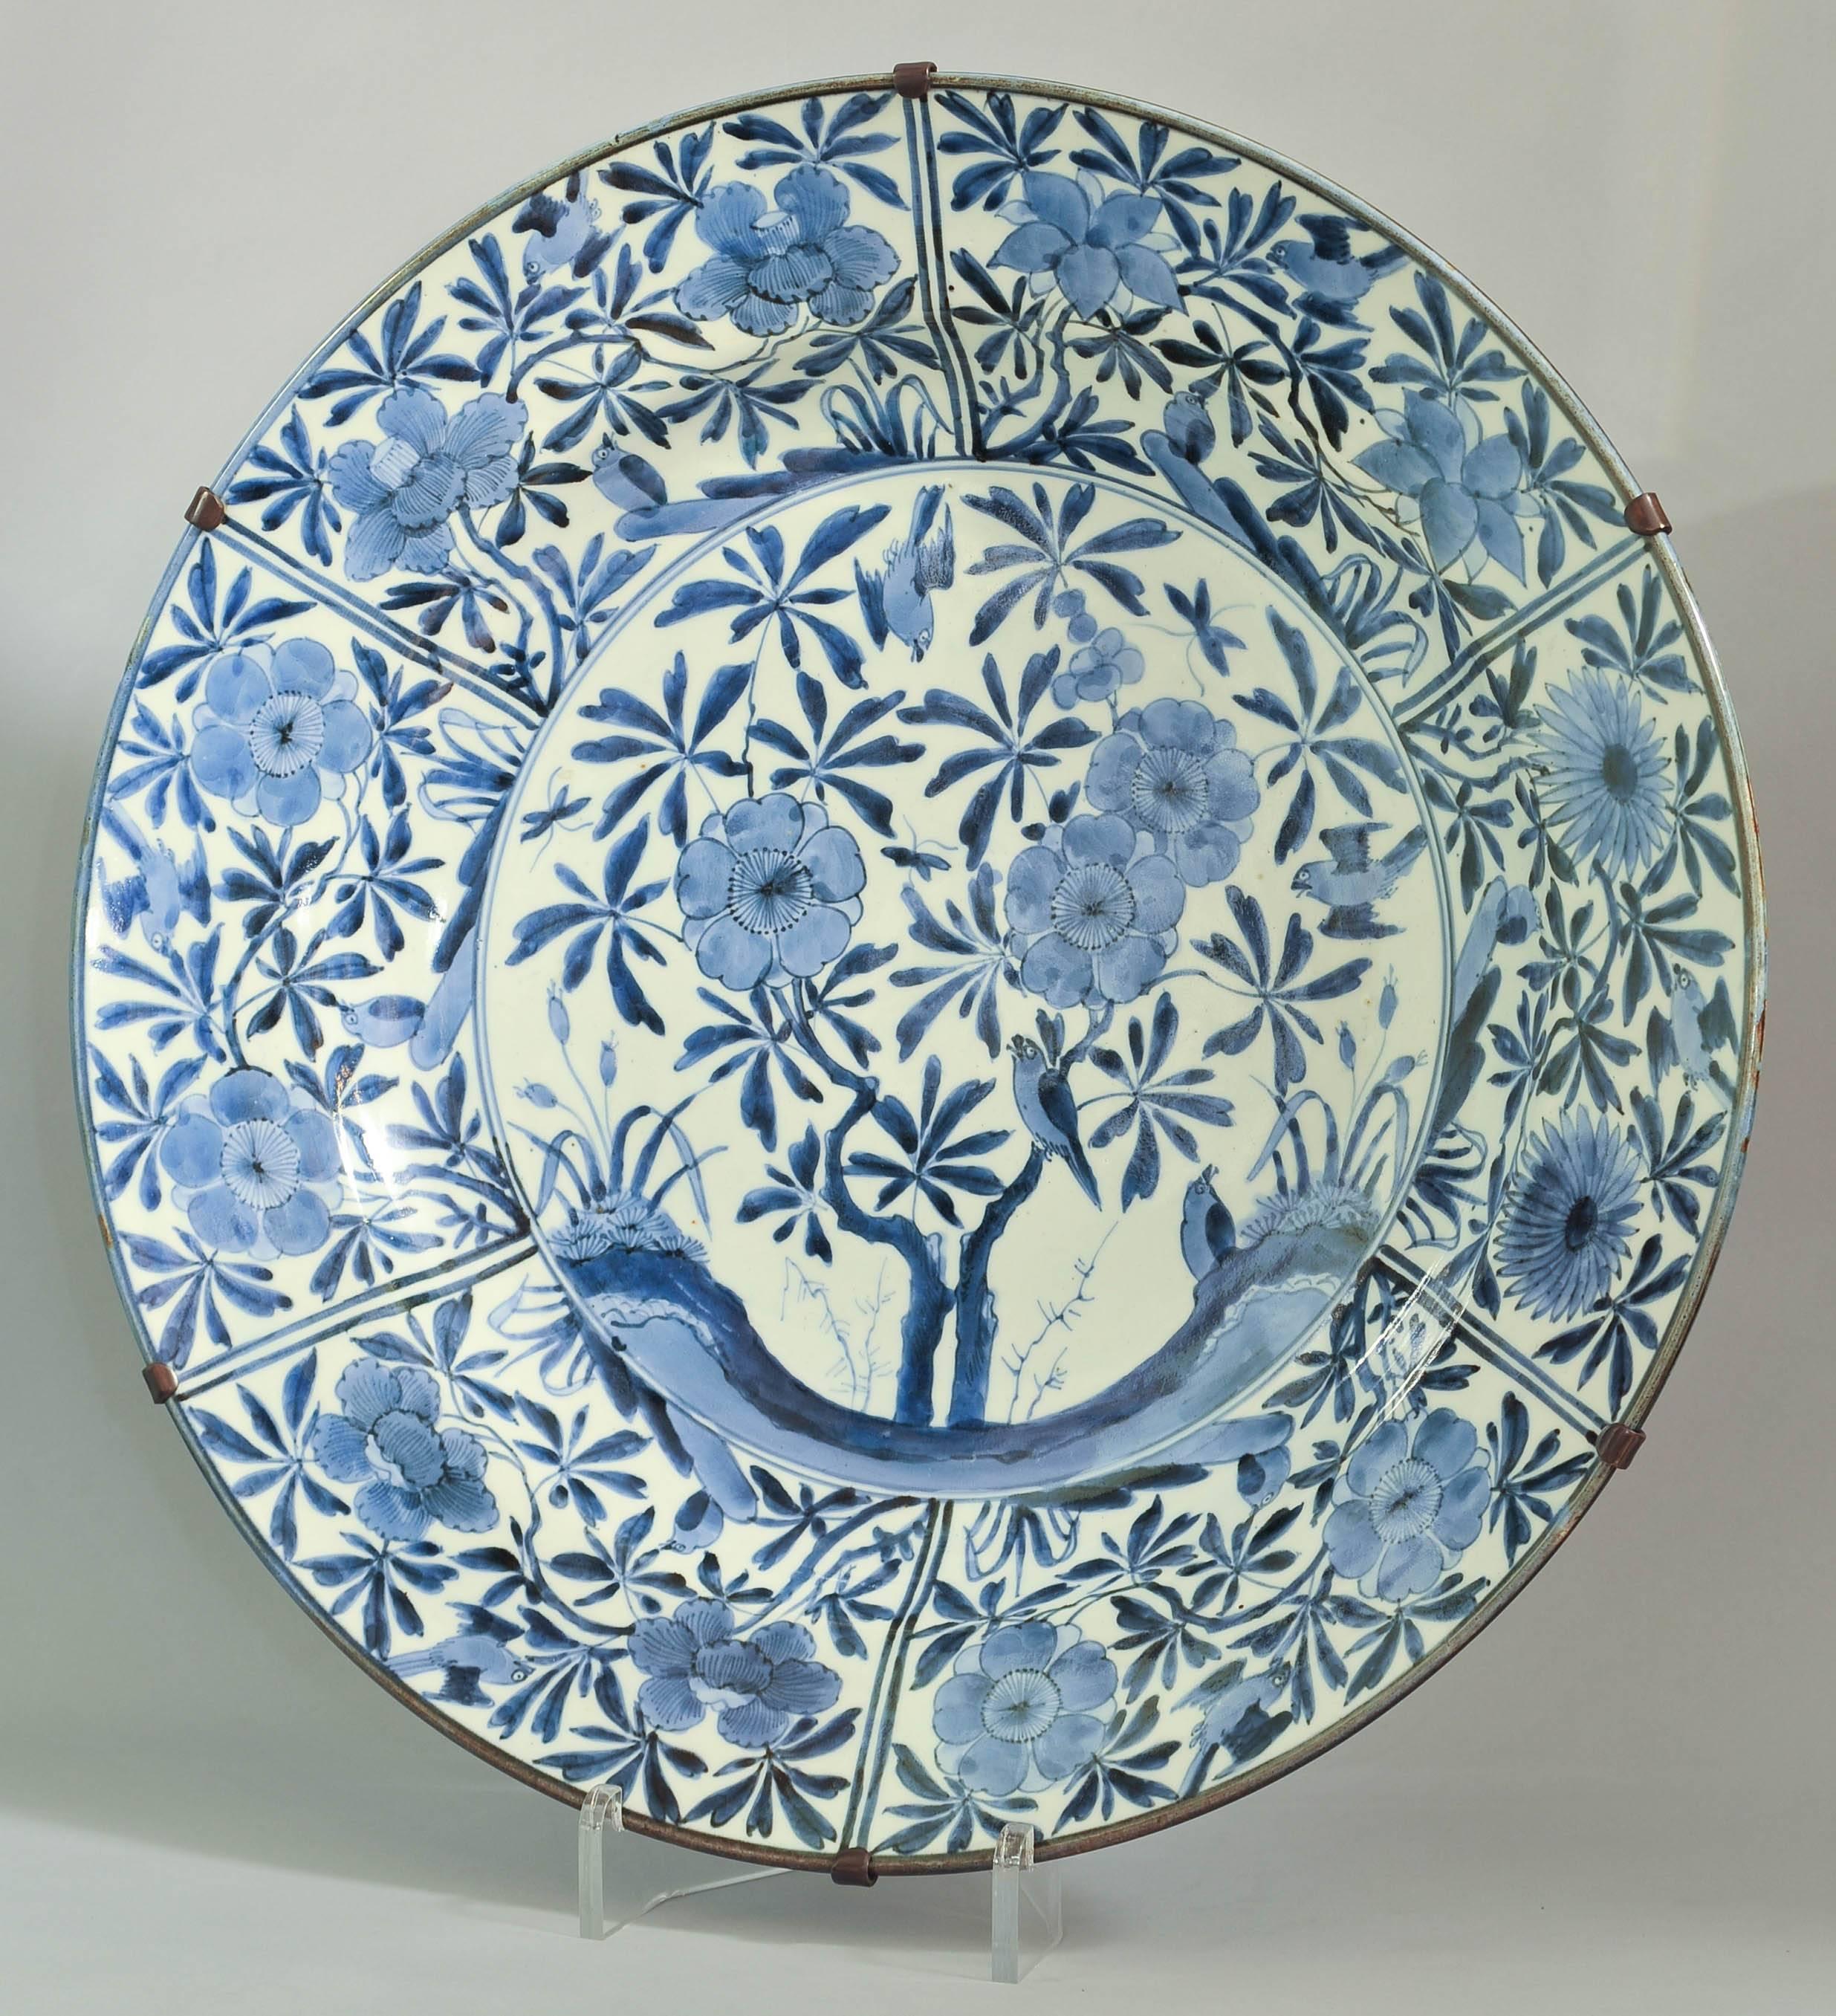 A large Japanese Arita blue and white porcelain charger dating from circa 1690 depicting birds and insects amongst scrolling blossoming tree branches and flowers. An old purpose made brass mount allows to hang in on the wall.
Perfect